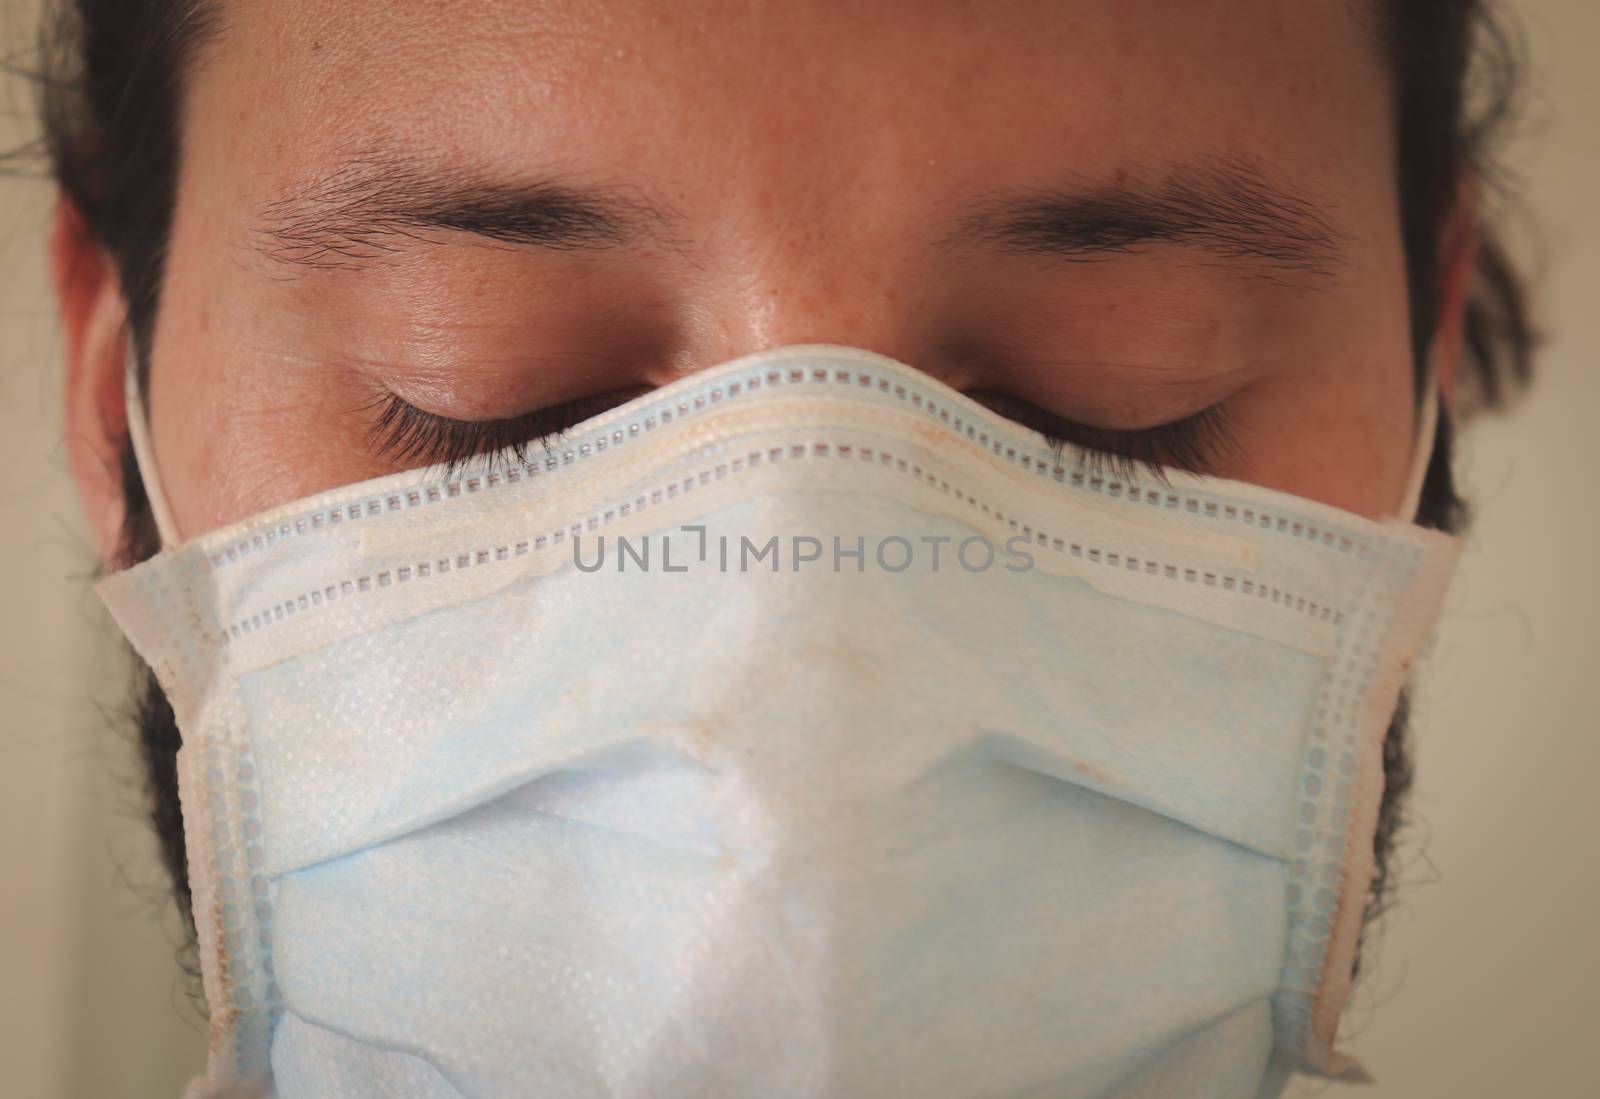 Portrait of a man wearing a surgical mask to show the concept of fighting the global pandemic which is the covid-19 with personal protective equipment or PPE